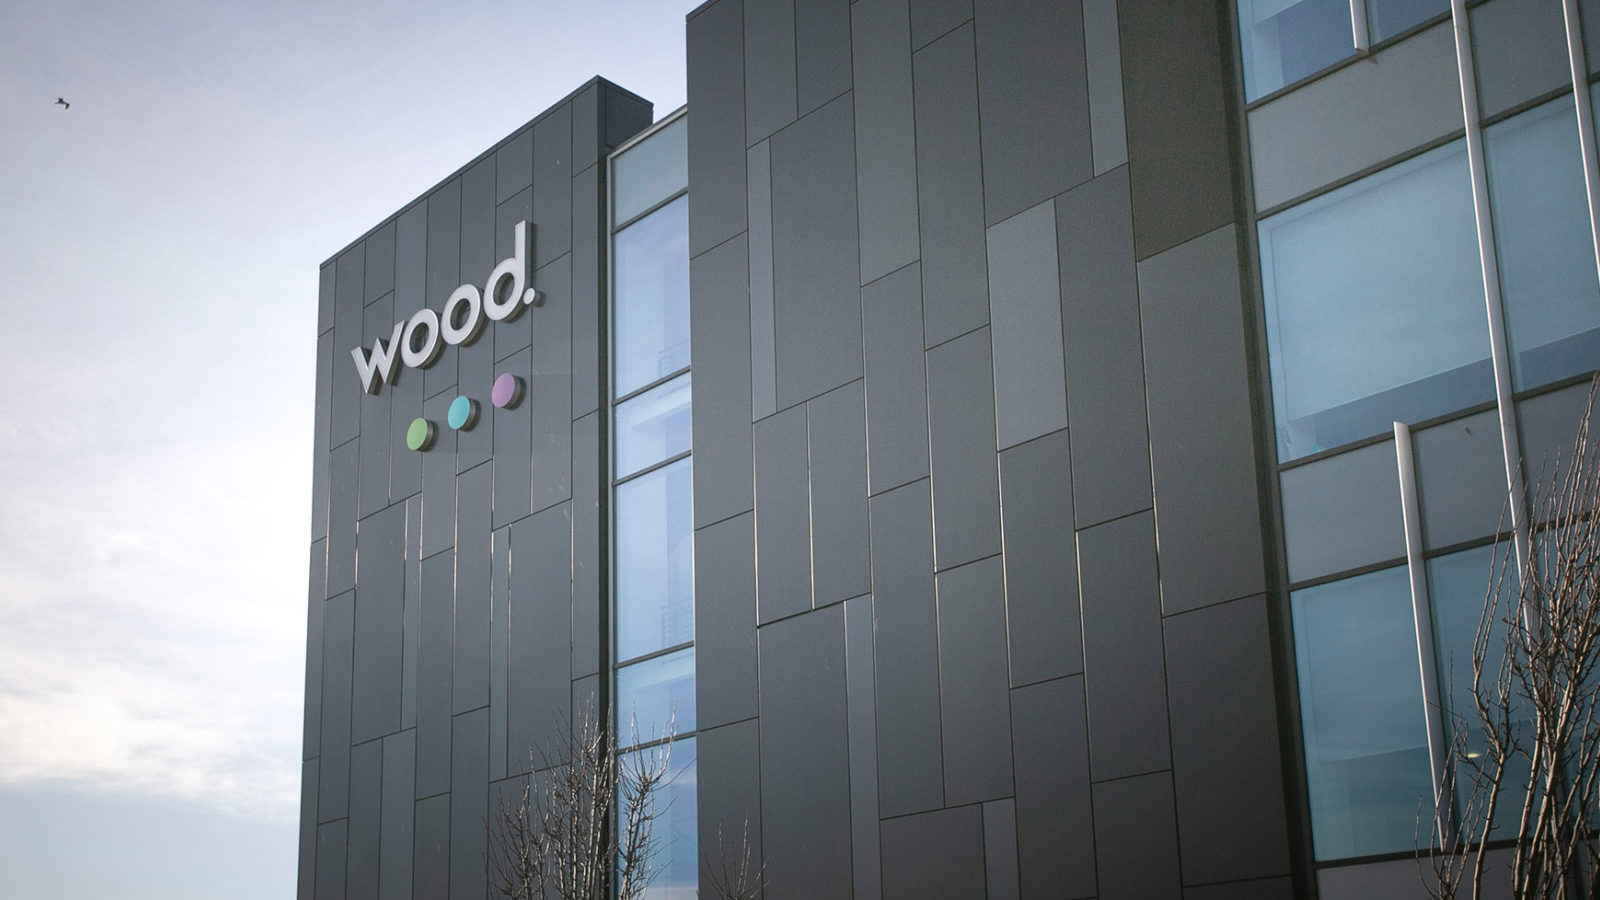 Wood Group faces call to explore sale